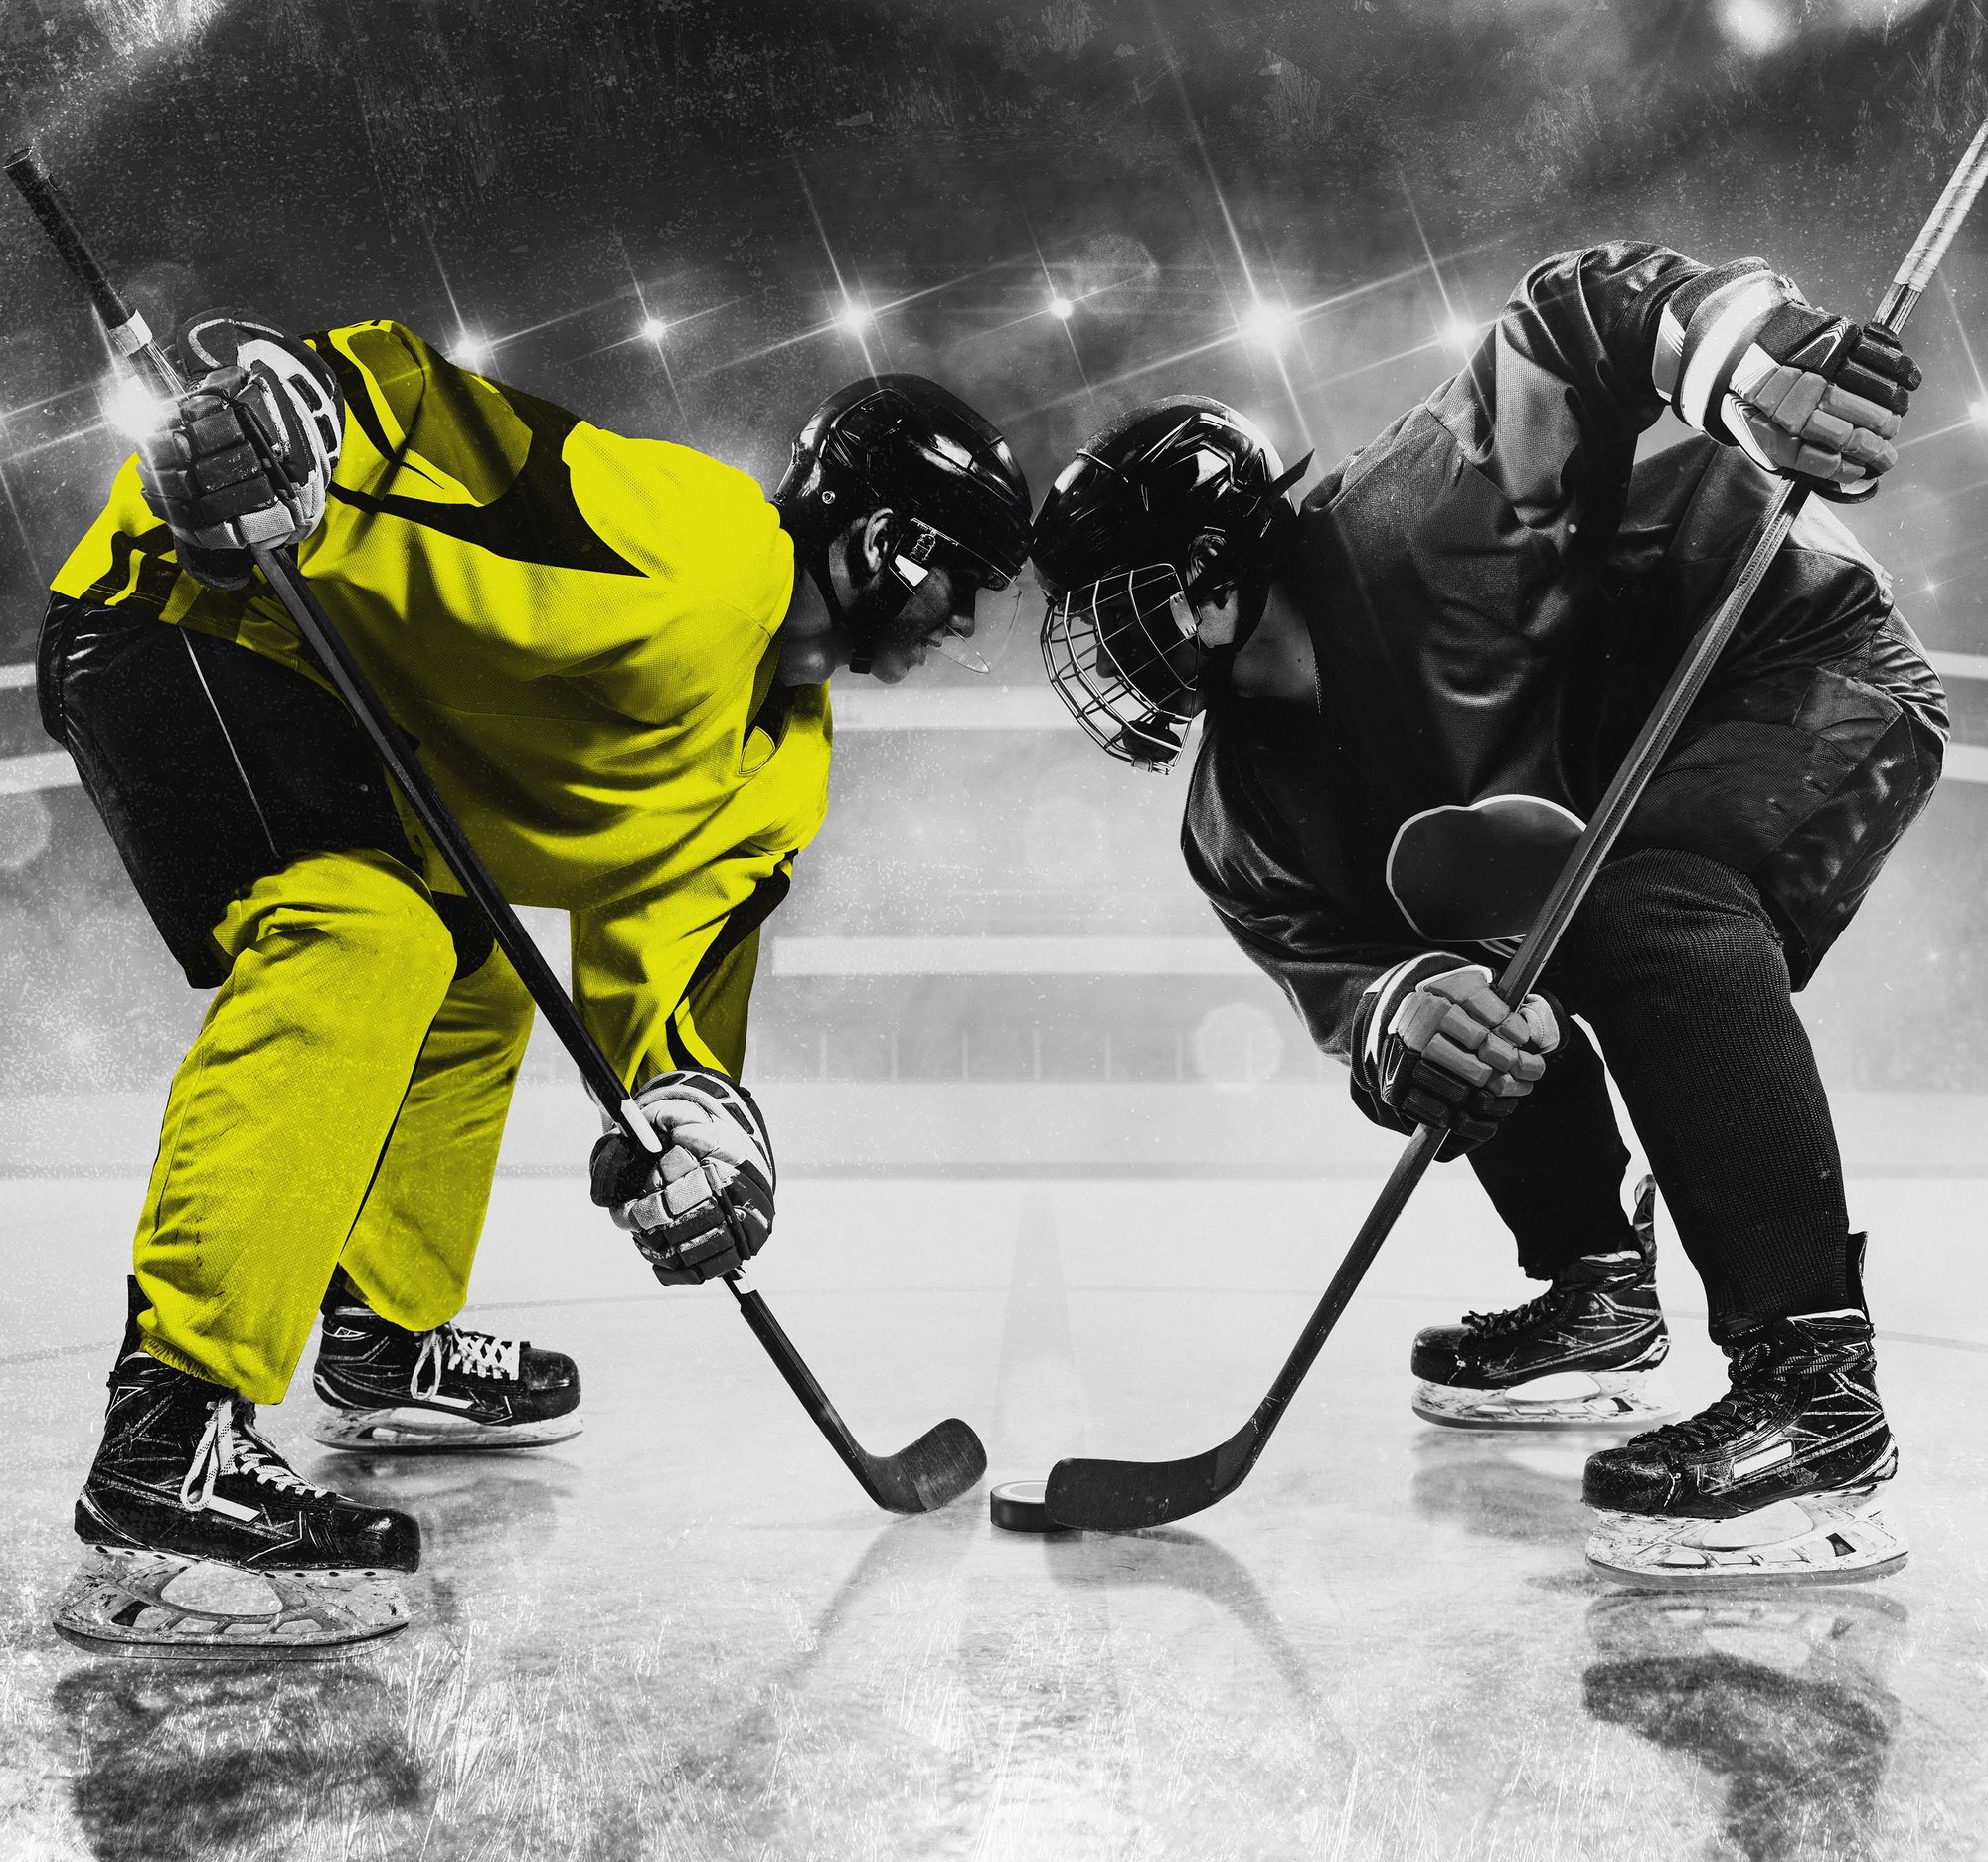 Campaign image Invicta with NHL players